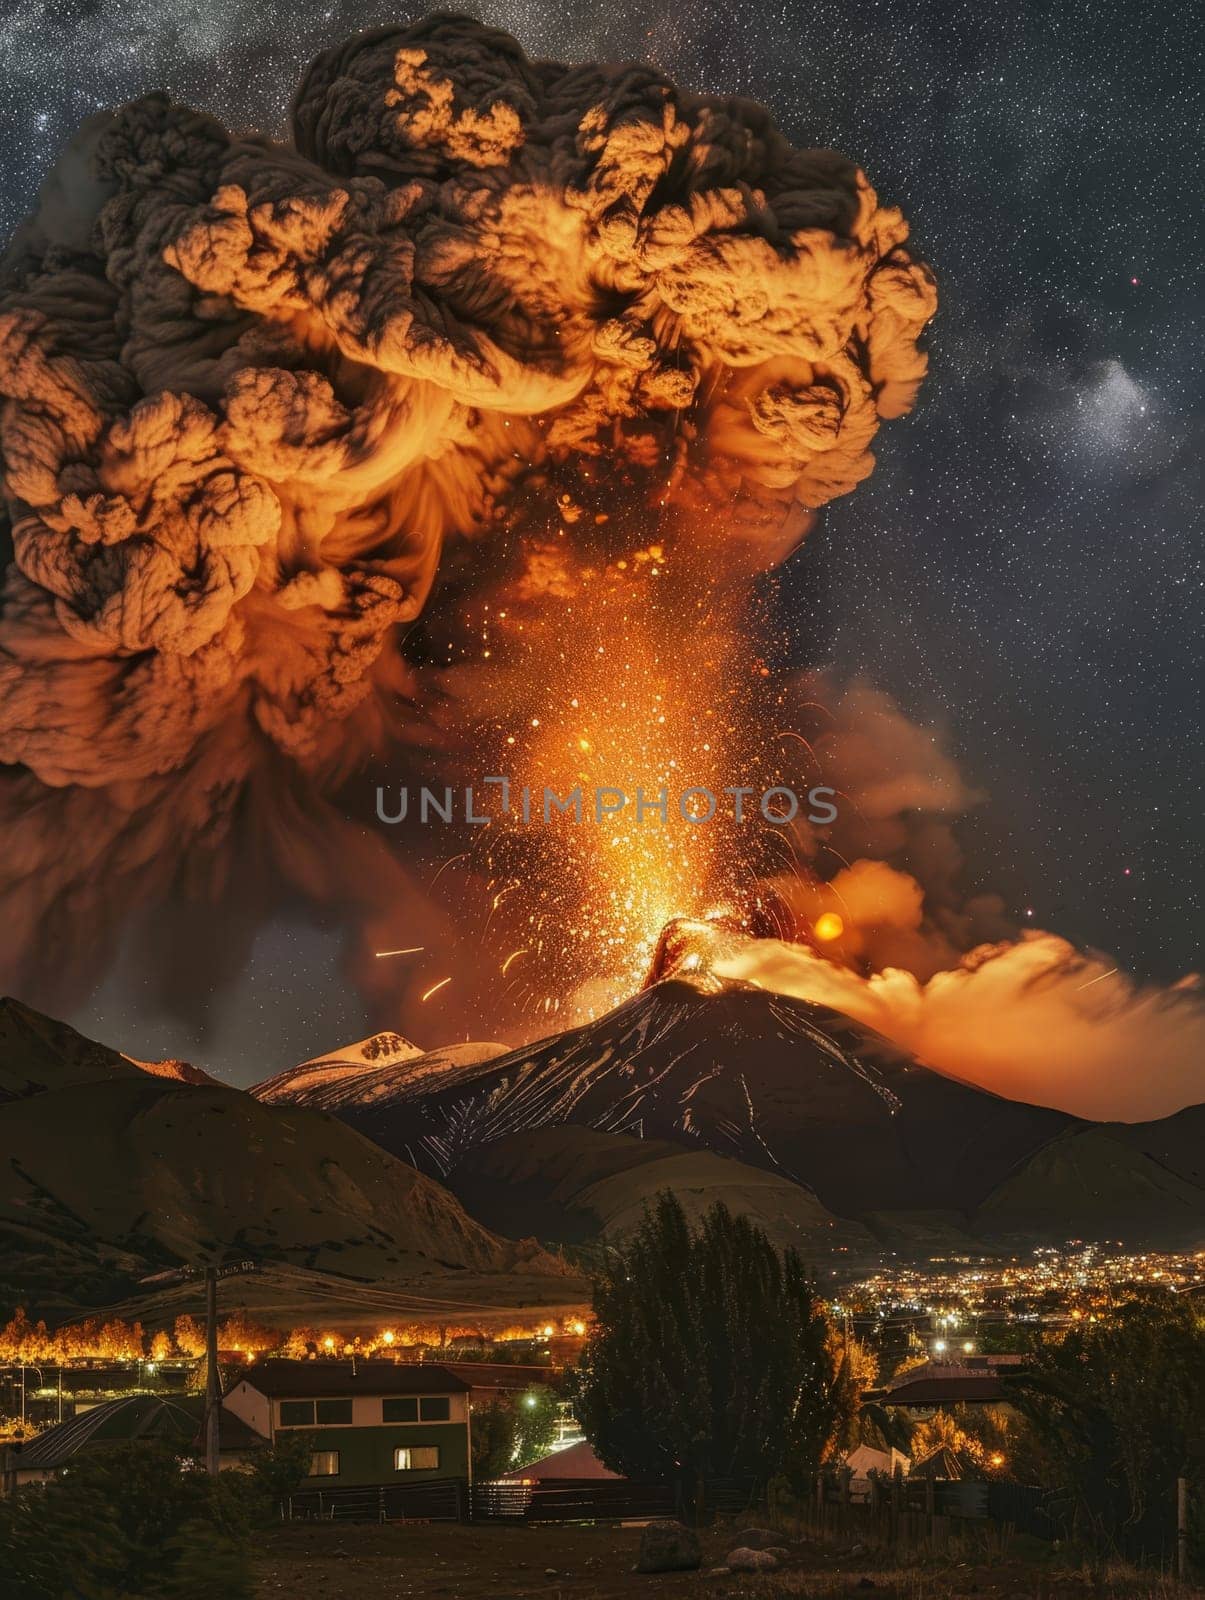 A volcanic eruption roars against a backdrop of a star-filled night, its ash plume reaching towards the cosmos. The spectacle of glowing lava and ash creates a stark contrast with the silent night sky